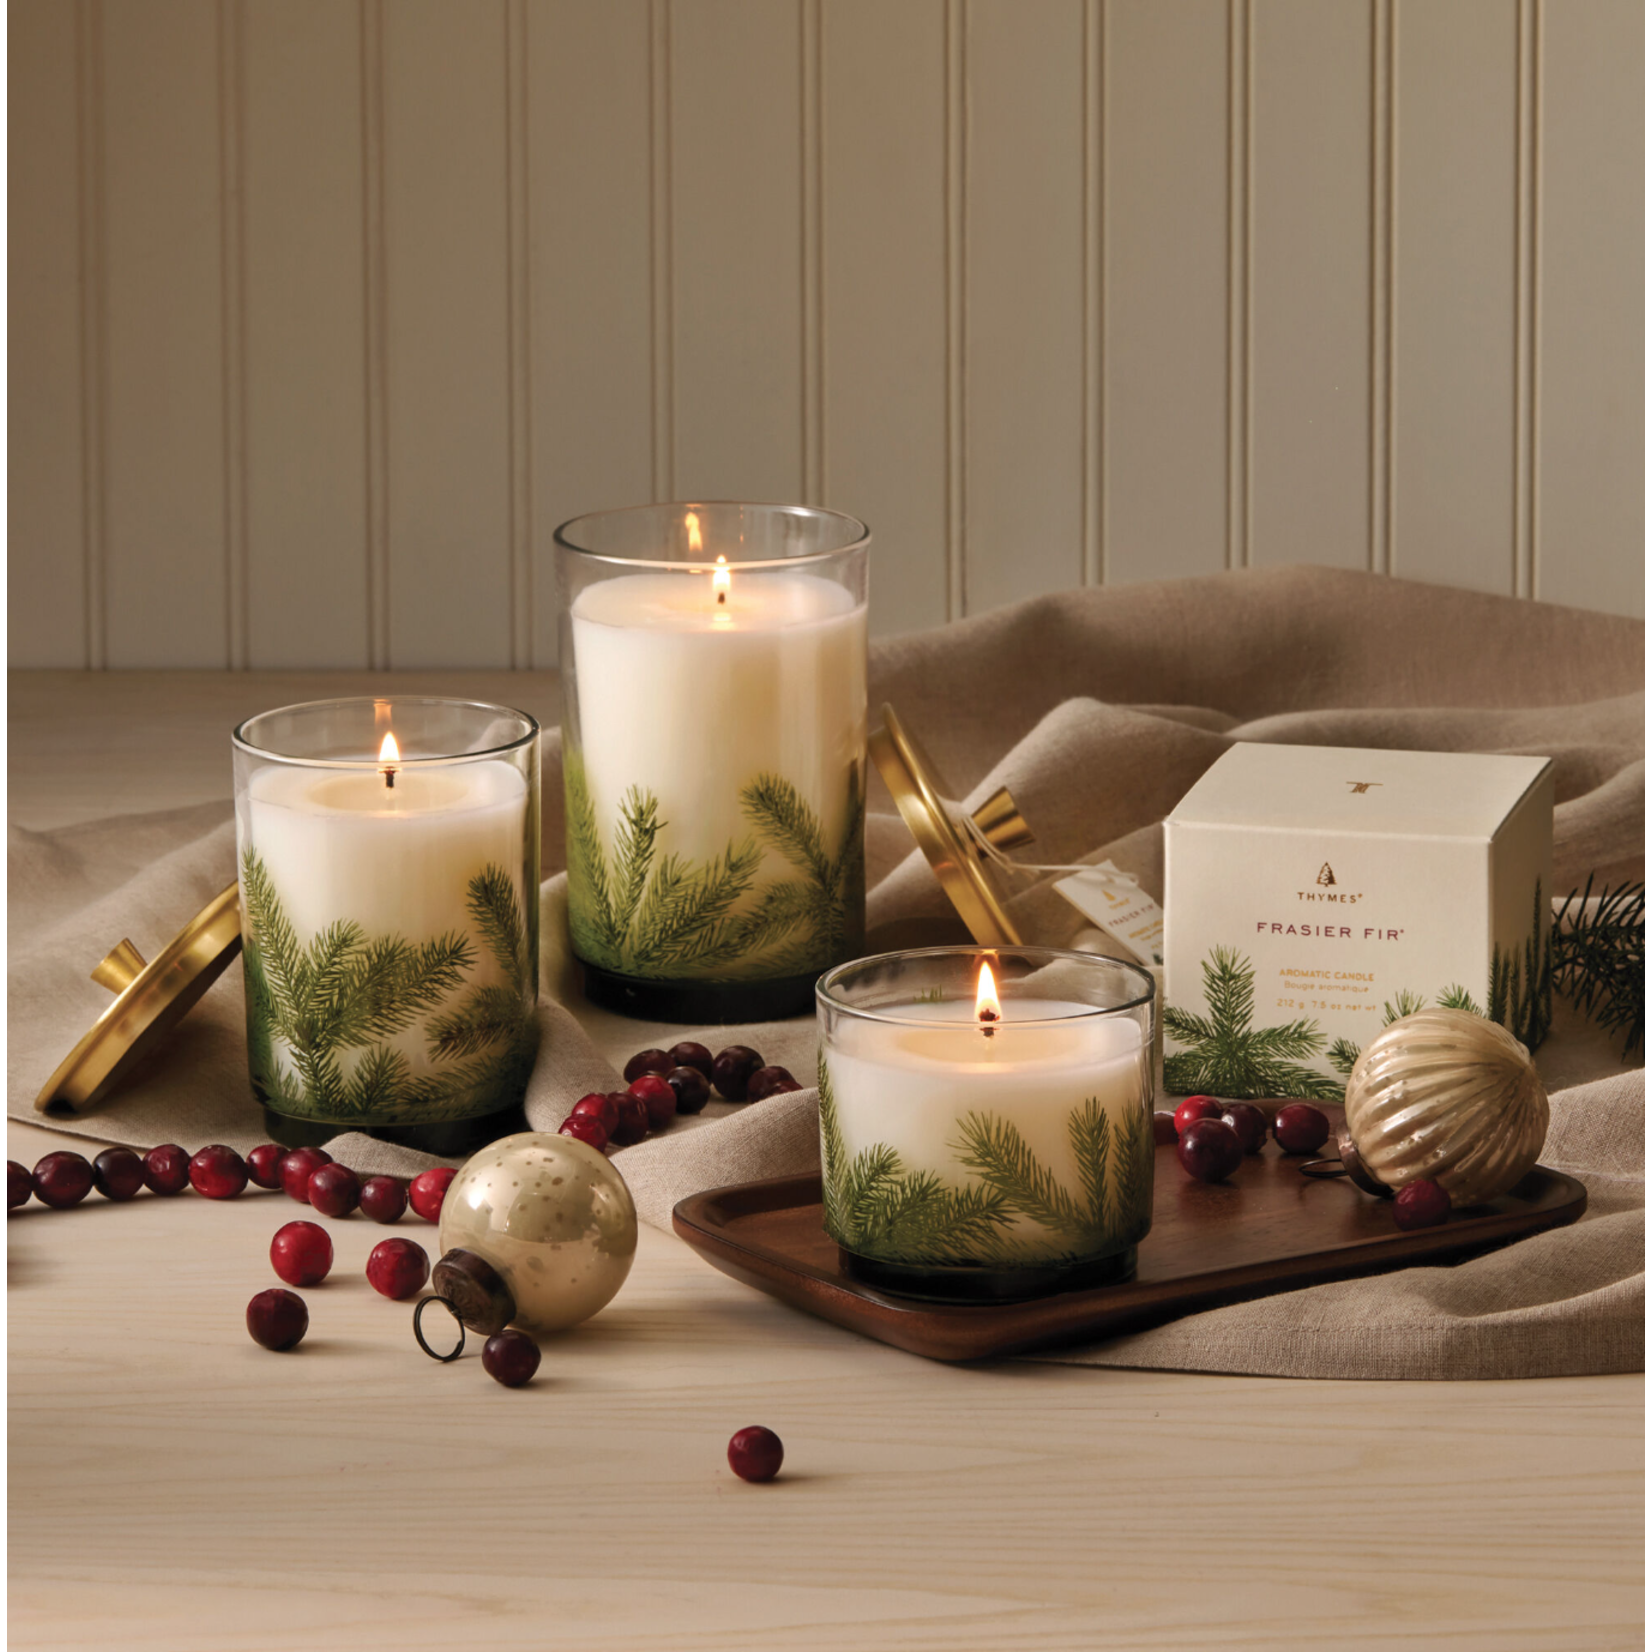 Thymes Frasier Fir Small Candle - Pine Needle